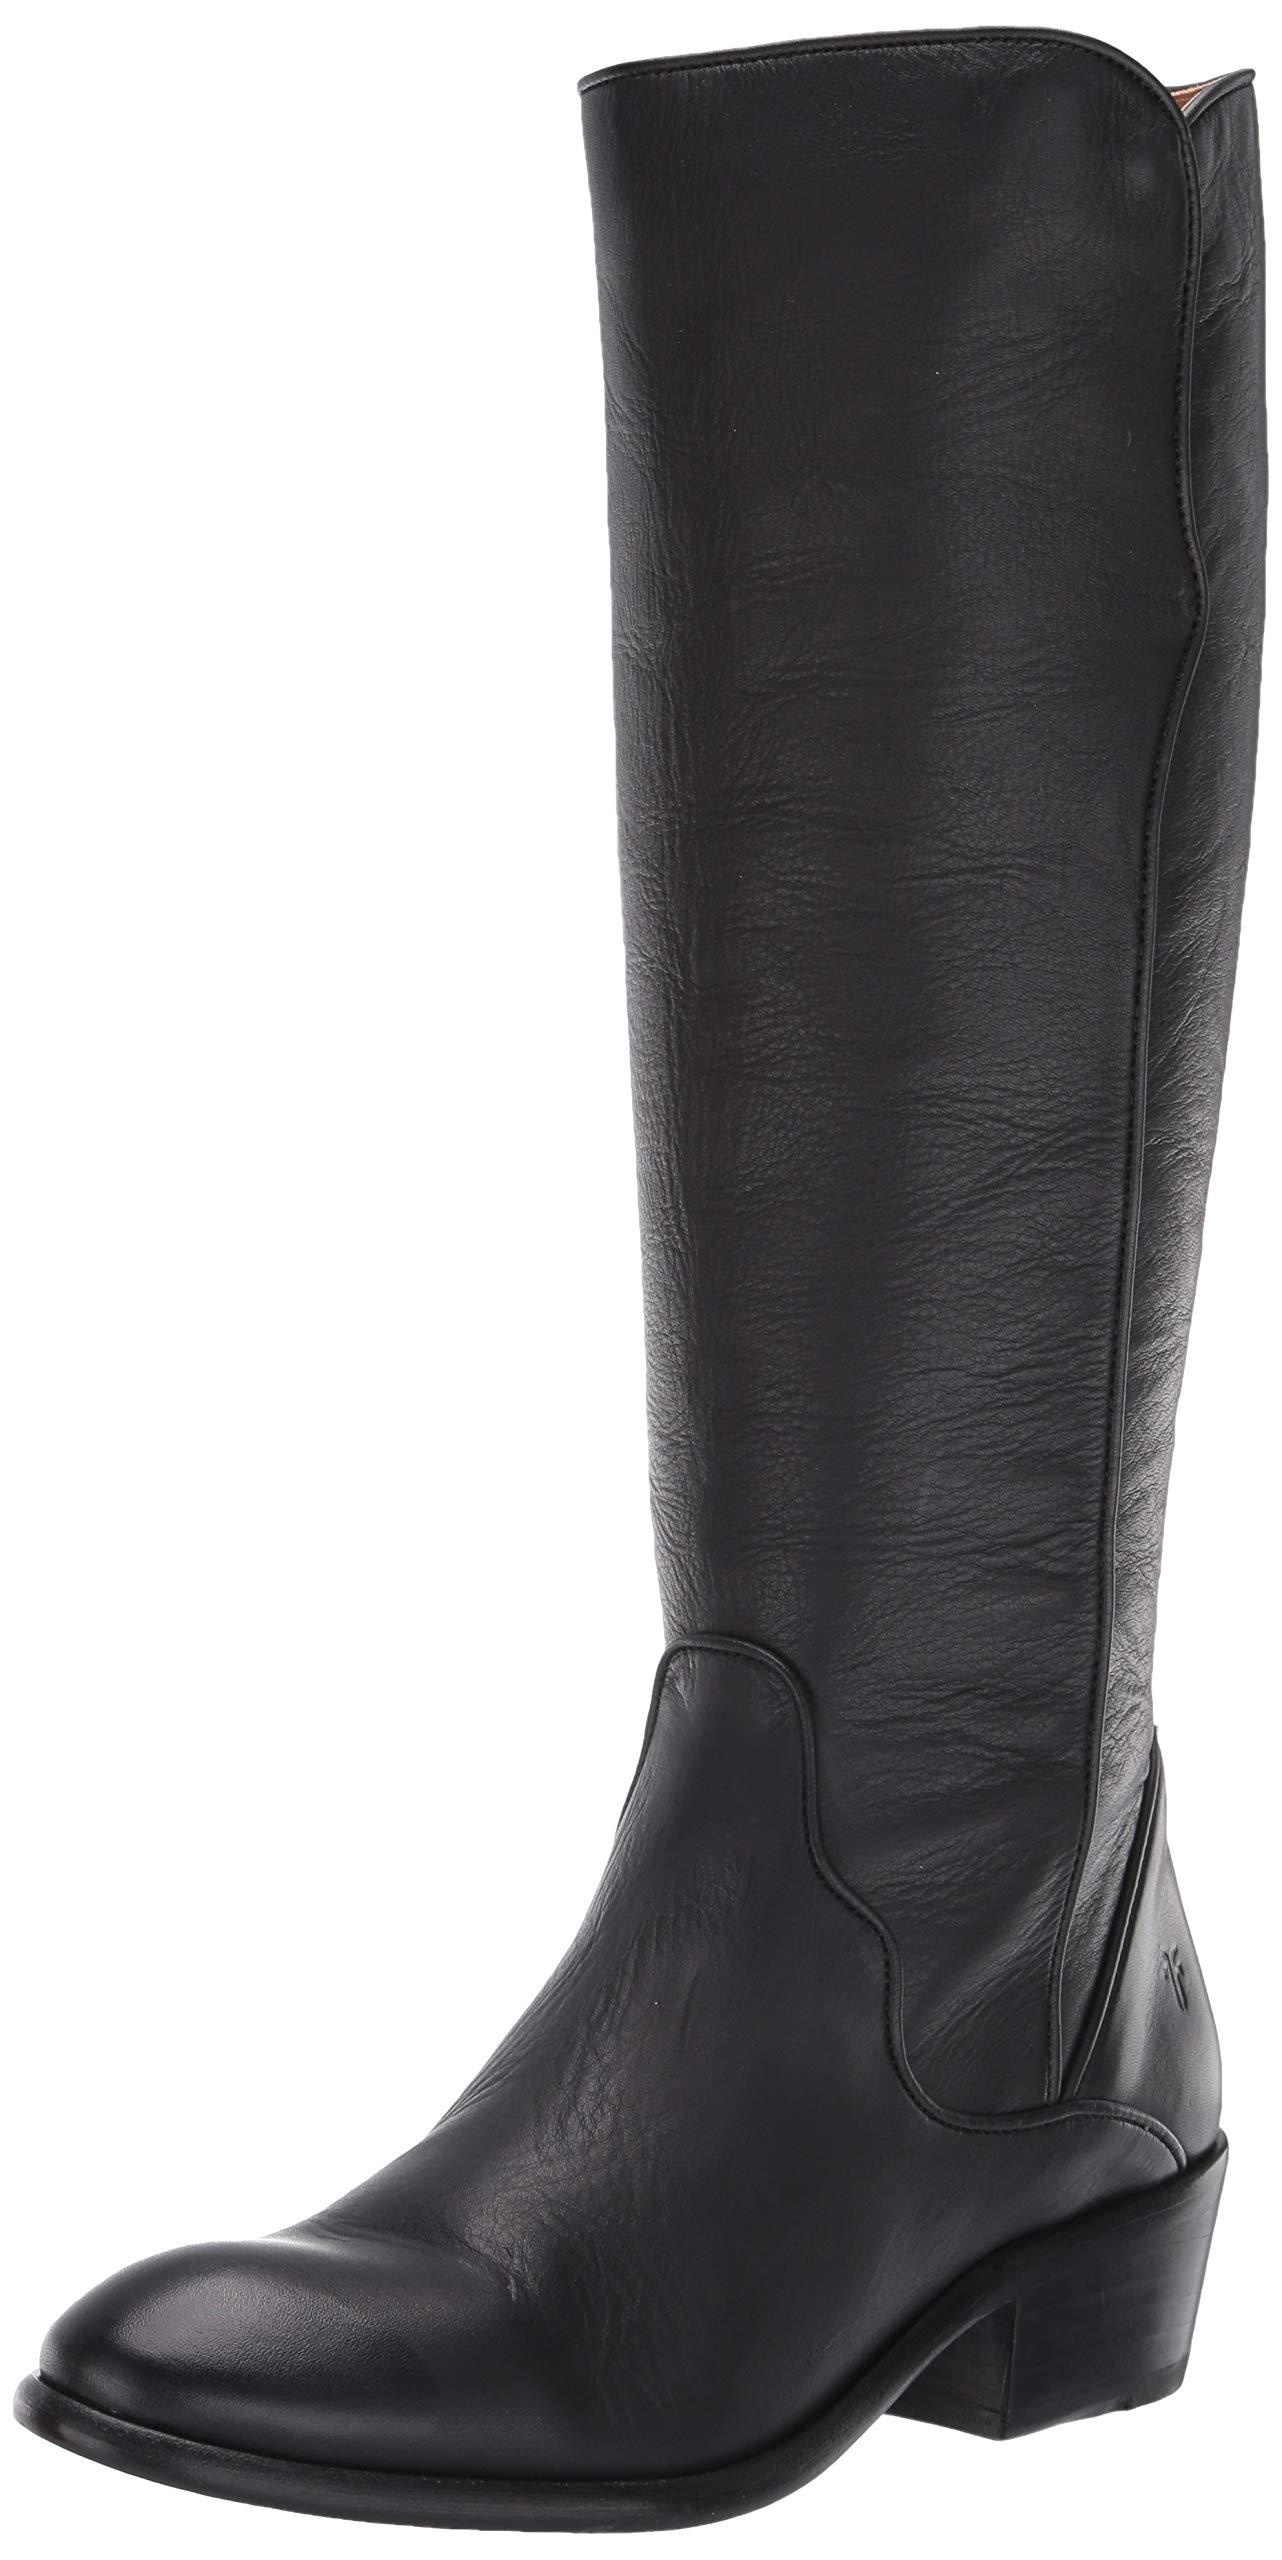 Frye Carson Piping Tall Knee High Boot in Black - Lyst